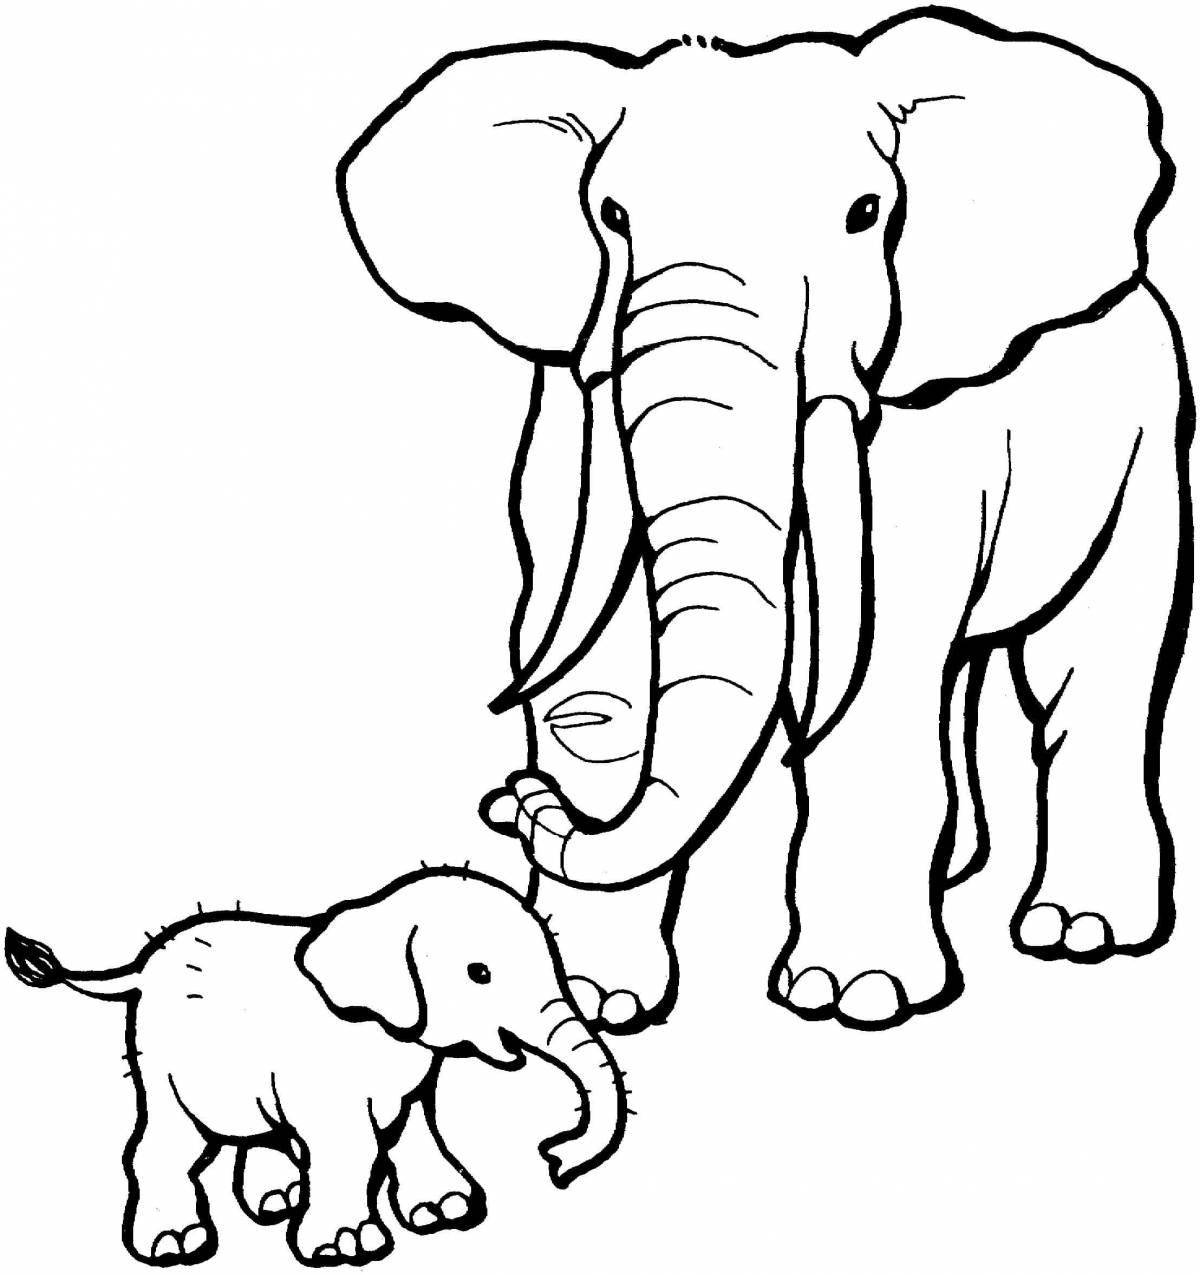 Radiant coloring page elephant picture